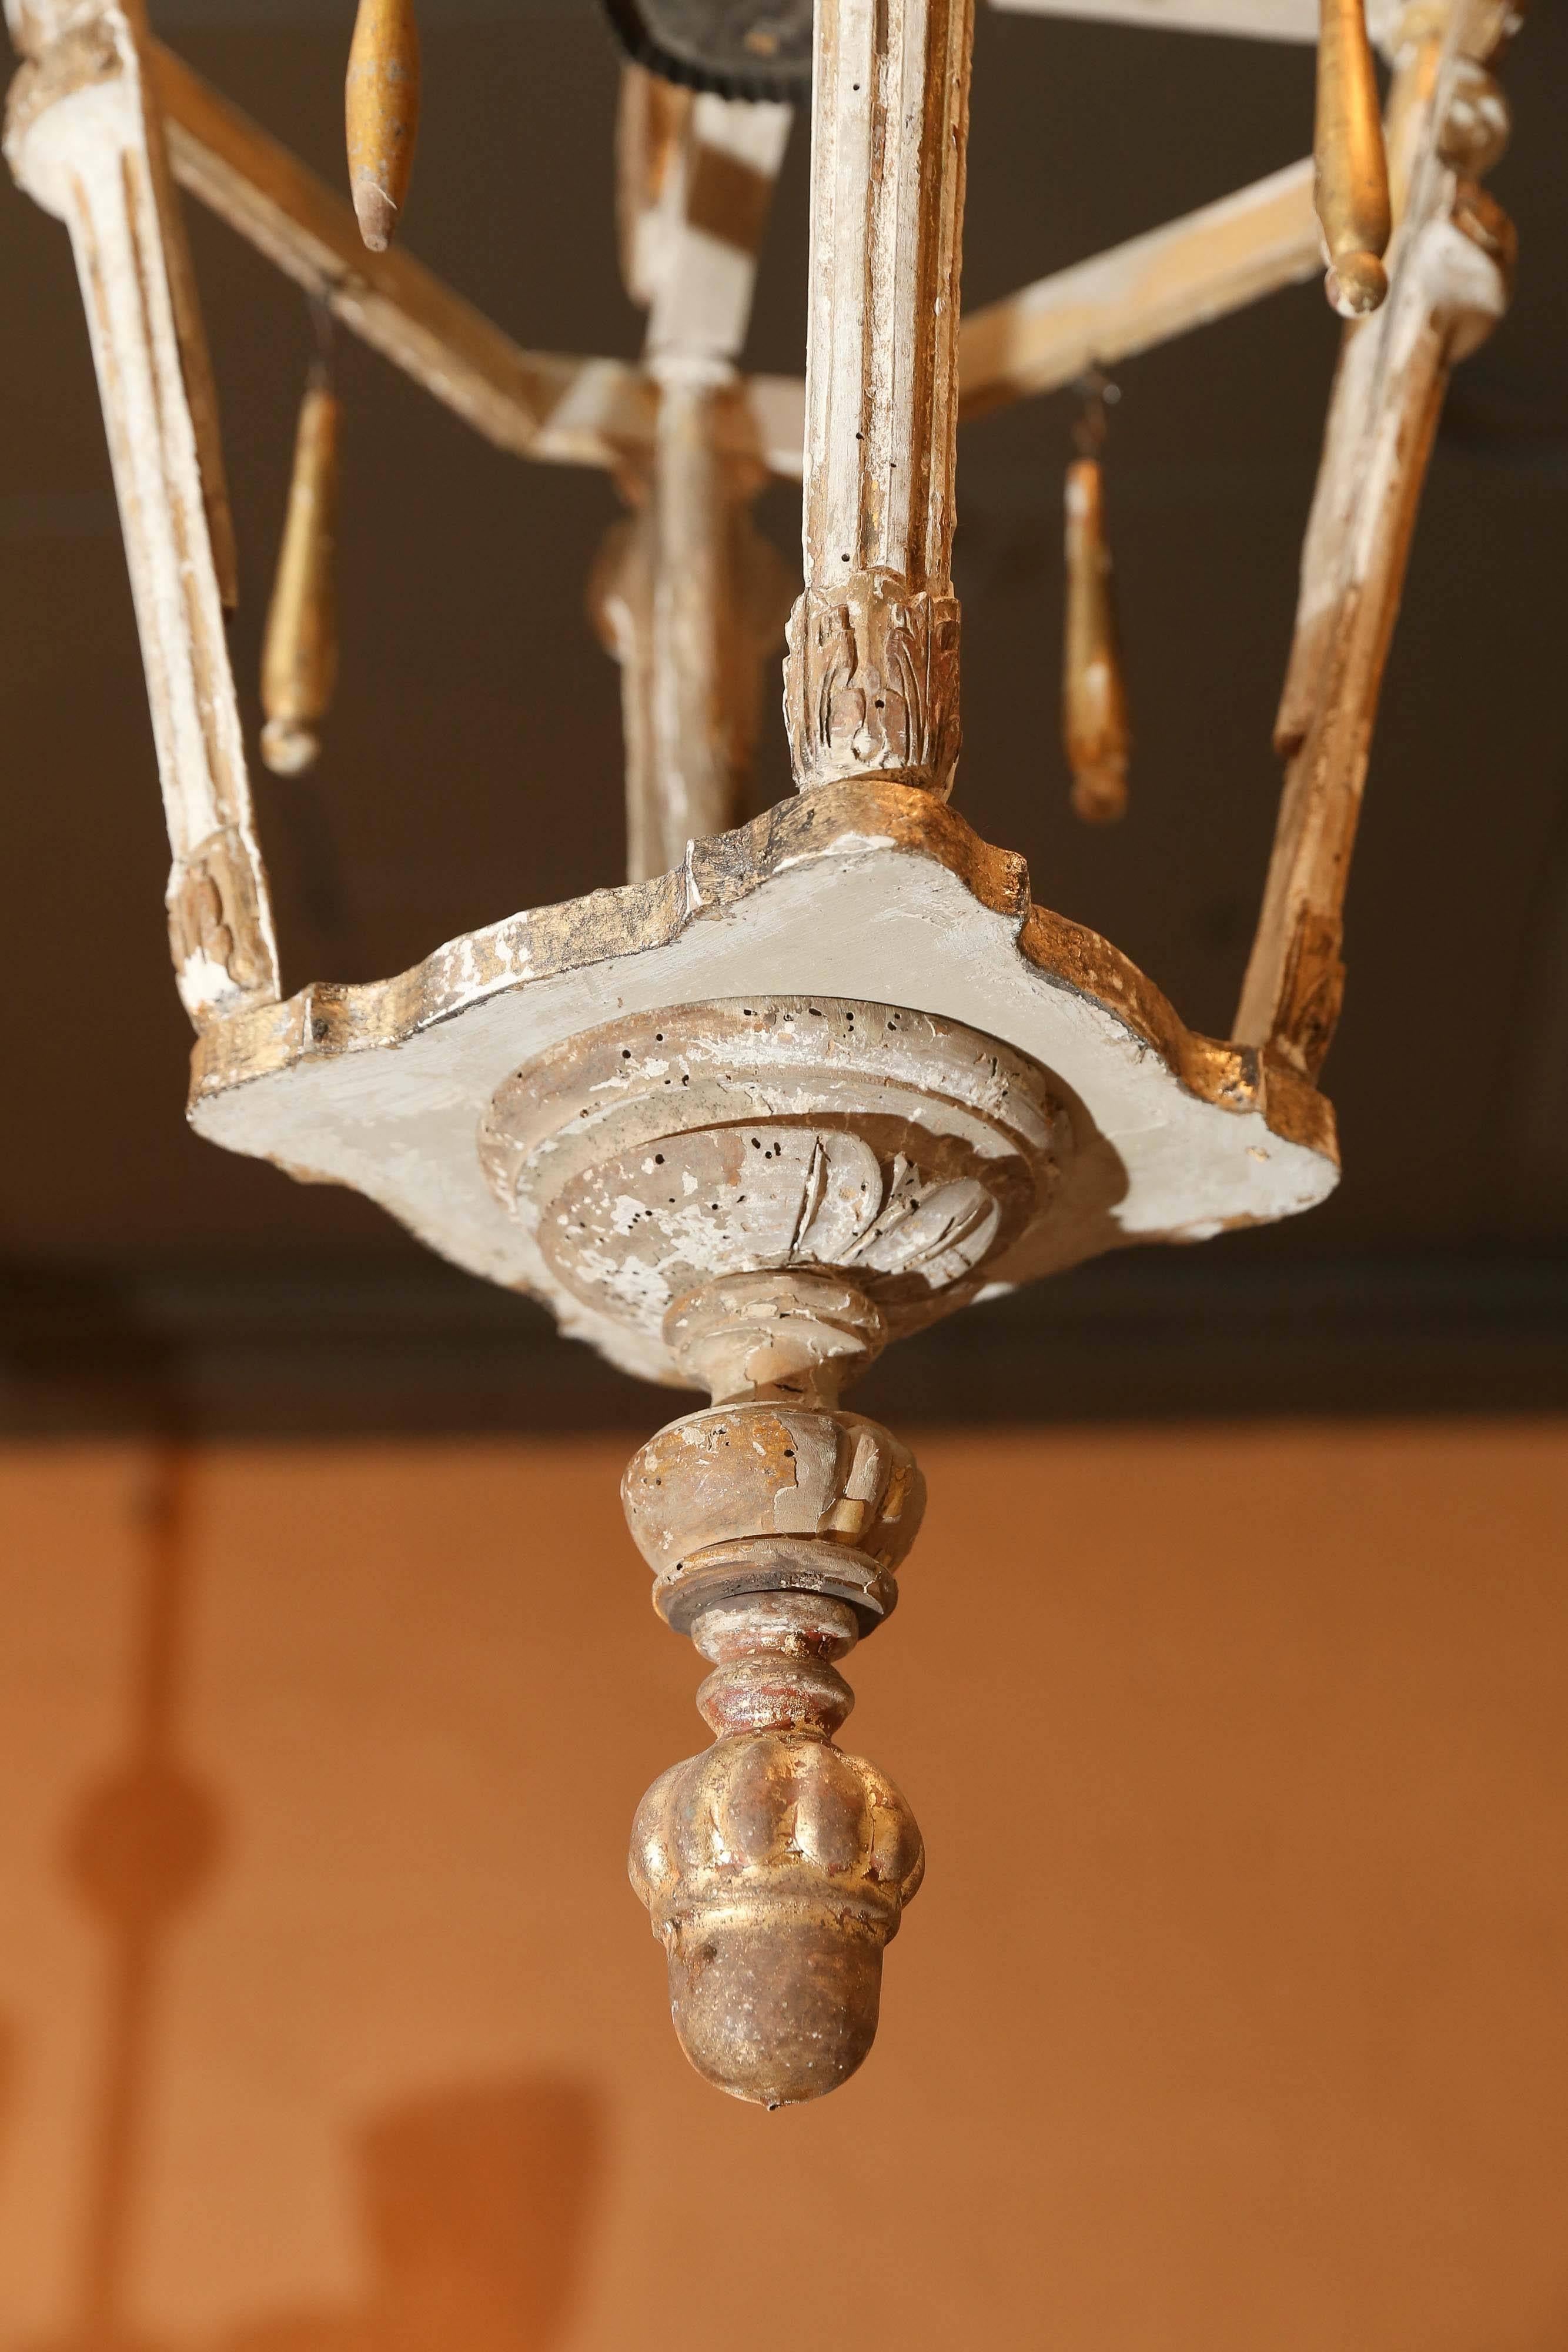 Hand carved wooden French lantern made from antique fragments. Finial and bottom fragments in original gilt. Traces of gilt on the lantern. Can be wired for electricity at an additional cost.

Note: Original/early finish on antique and vintage metal